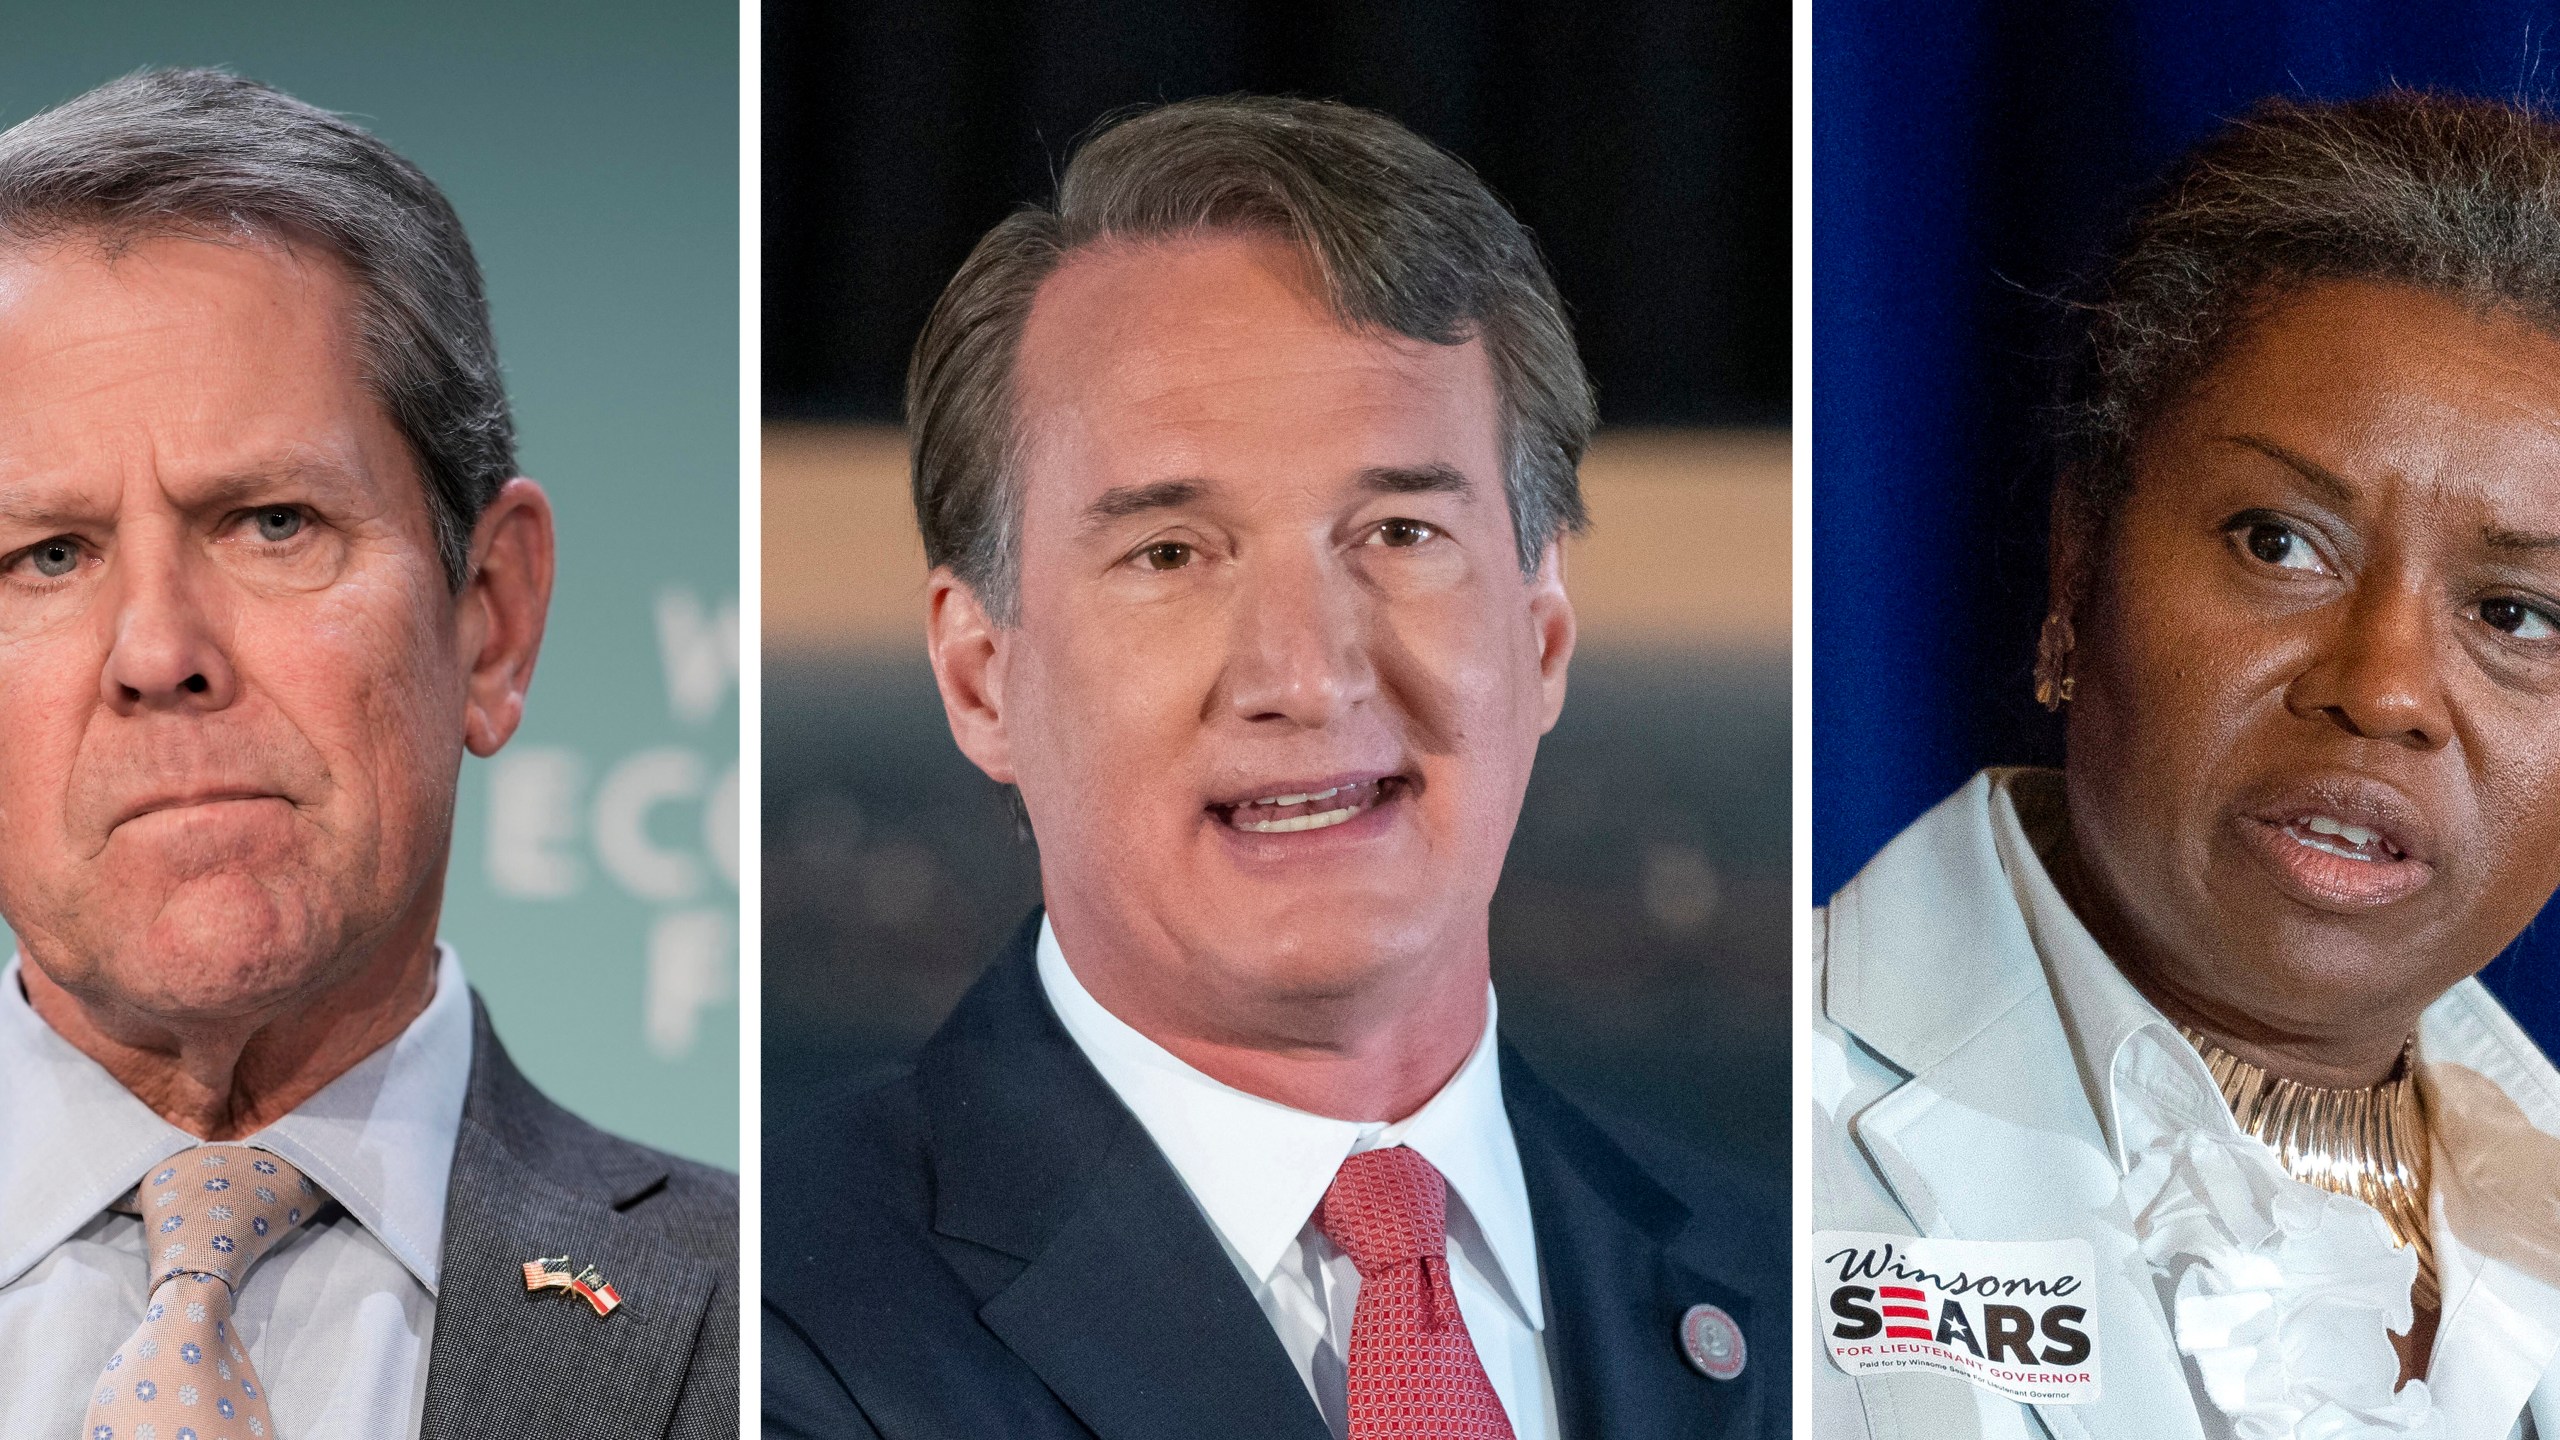 This combination photo shows Georgia Gov. Brian Kemp on Jan. 18, 2024, from left, Virginia Gov. Glenn Youngkin on Dec. 13, 2023, and Virginia Lt. Gov. Winsome Sears on Sept. 1, 2021. Many GOP leaders in battleground states are offering former President Donald Trump only tepid support, or not endorsing him at all, in the 2024 presidential election. (AP Photo)